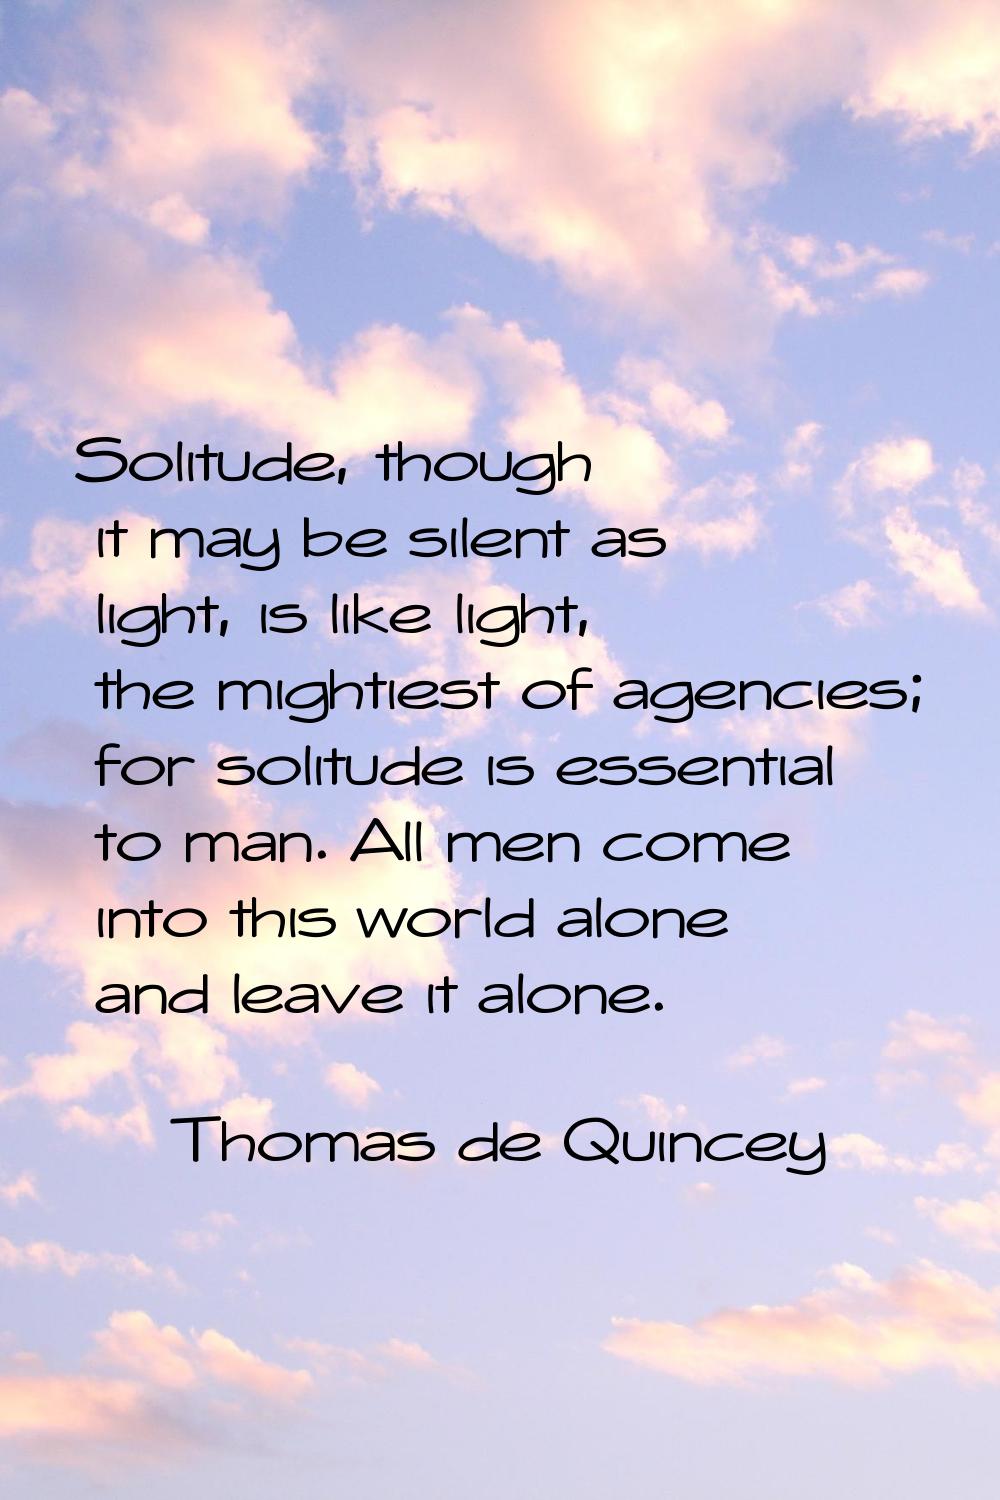 Solitude, though it may be silent as light, is like light, the mightiest of agencies; for solitude 